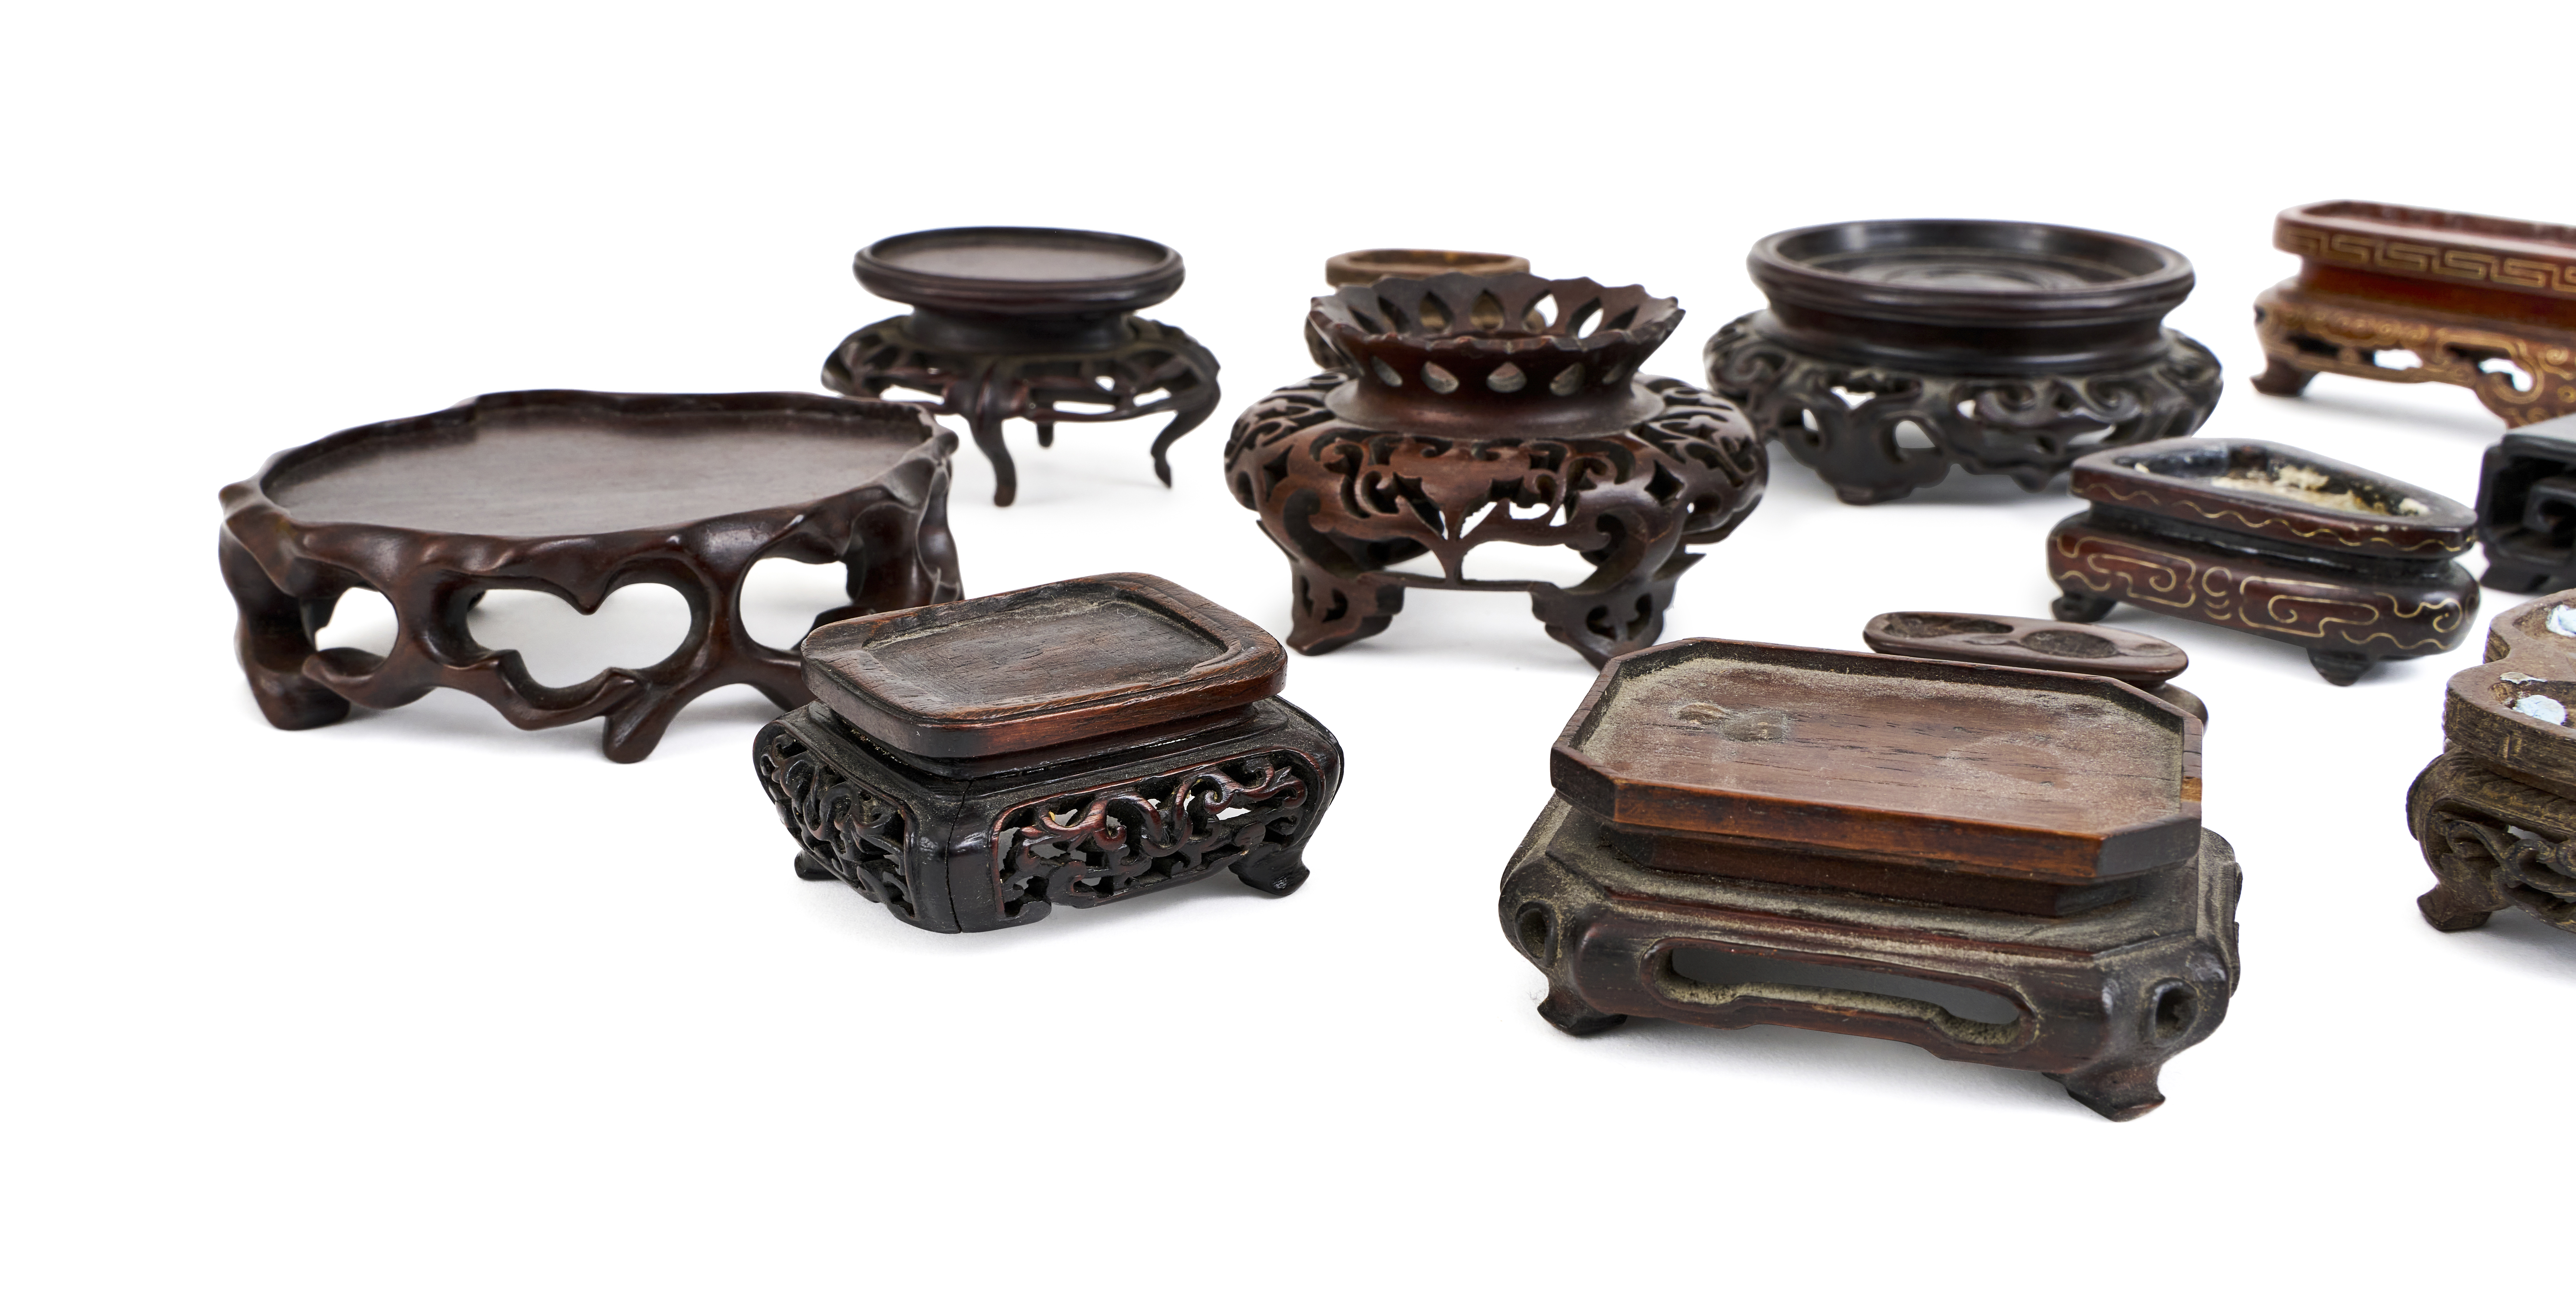 ASSORTMENT OF CHINESE WOODEN STANDS, QING DYNASTY (1644-1911) - Image 5 of 5